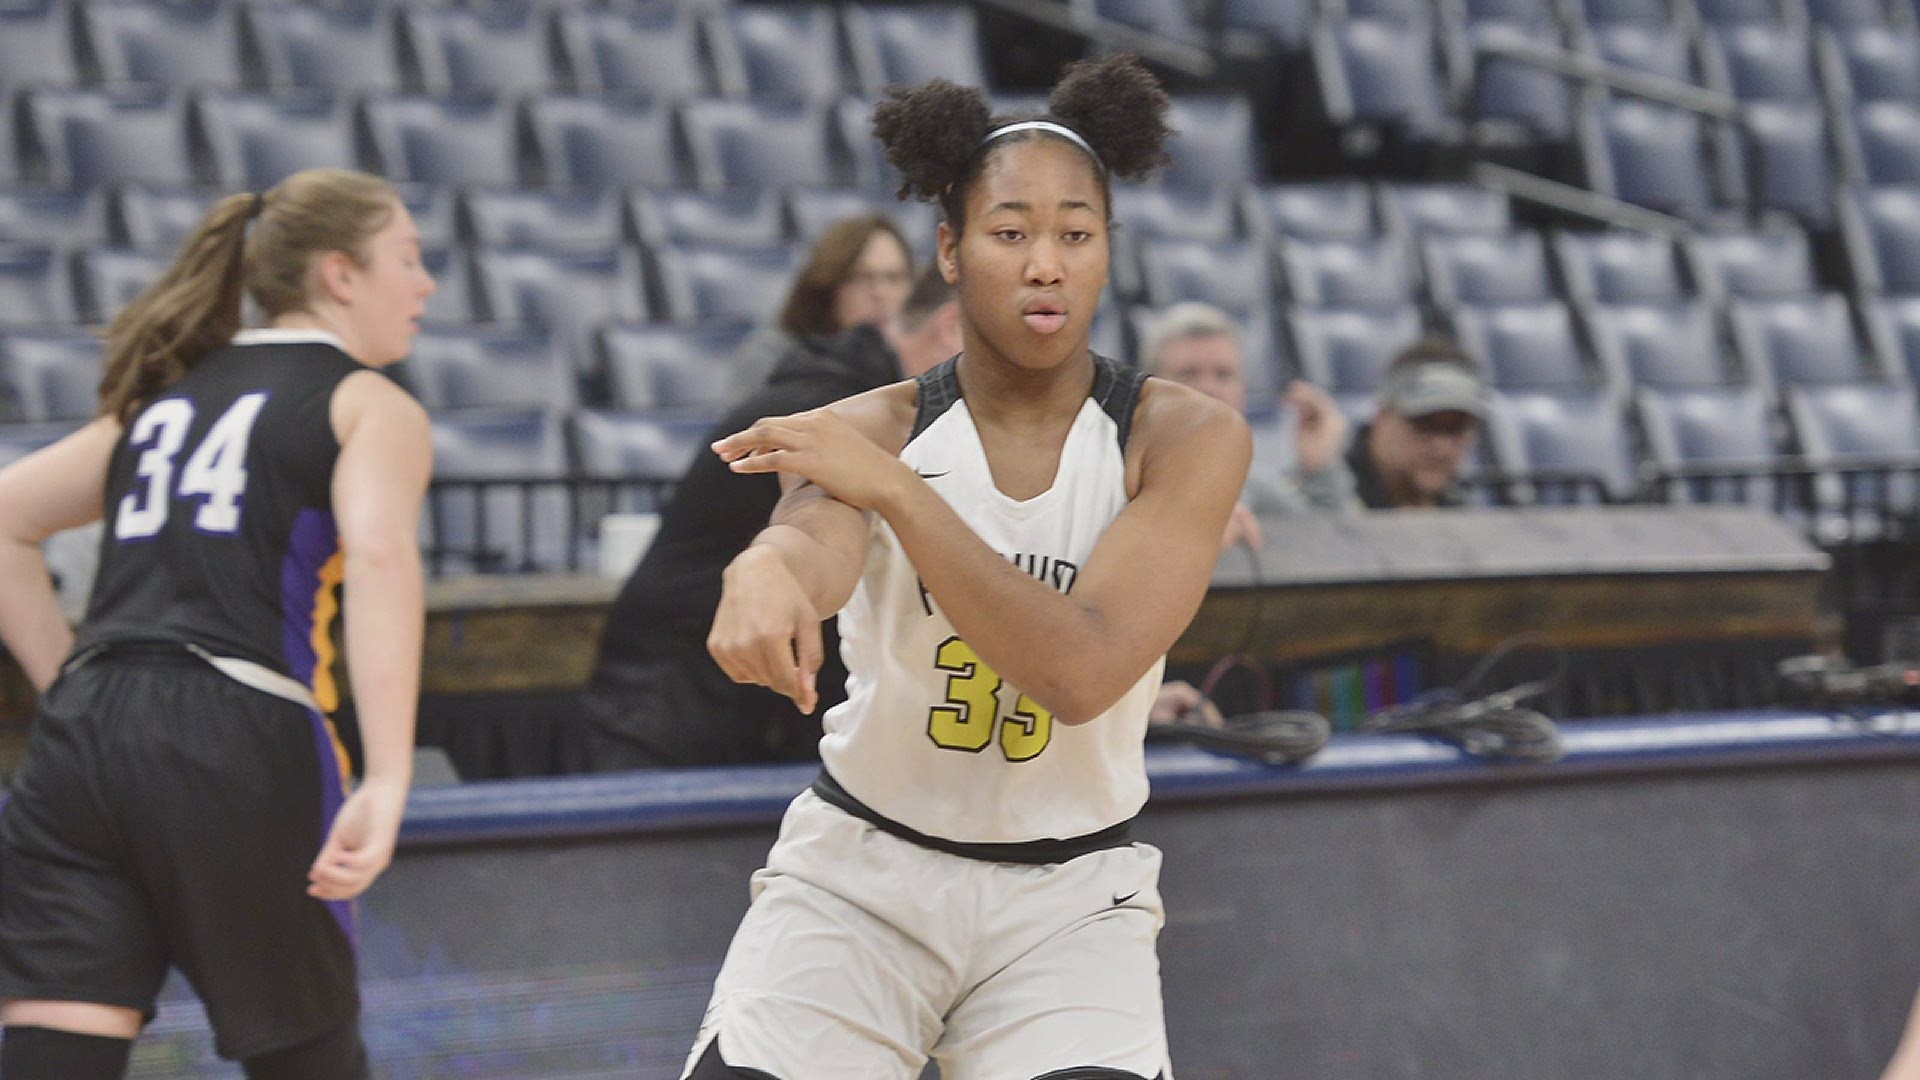 The 6-foot-3 Georgia Tech signee's athleticism allows The Sting to use her in the backcourt